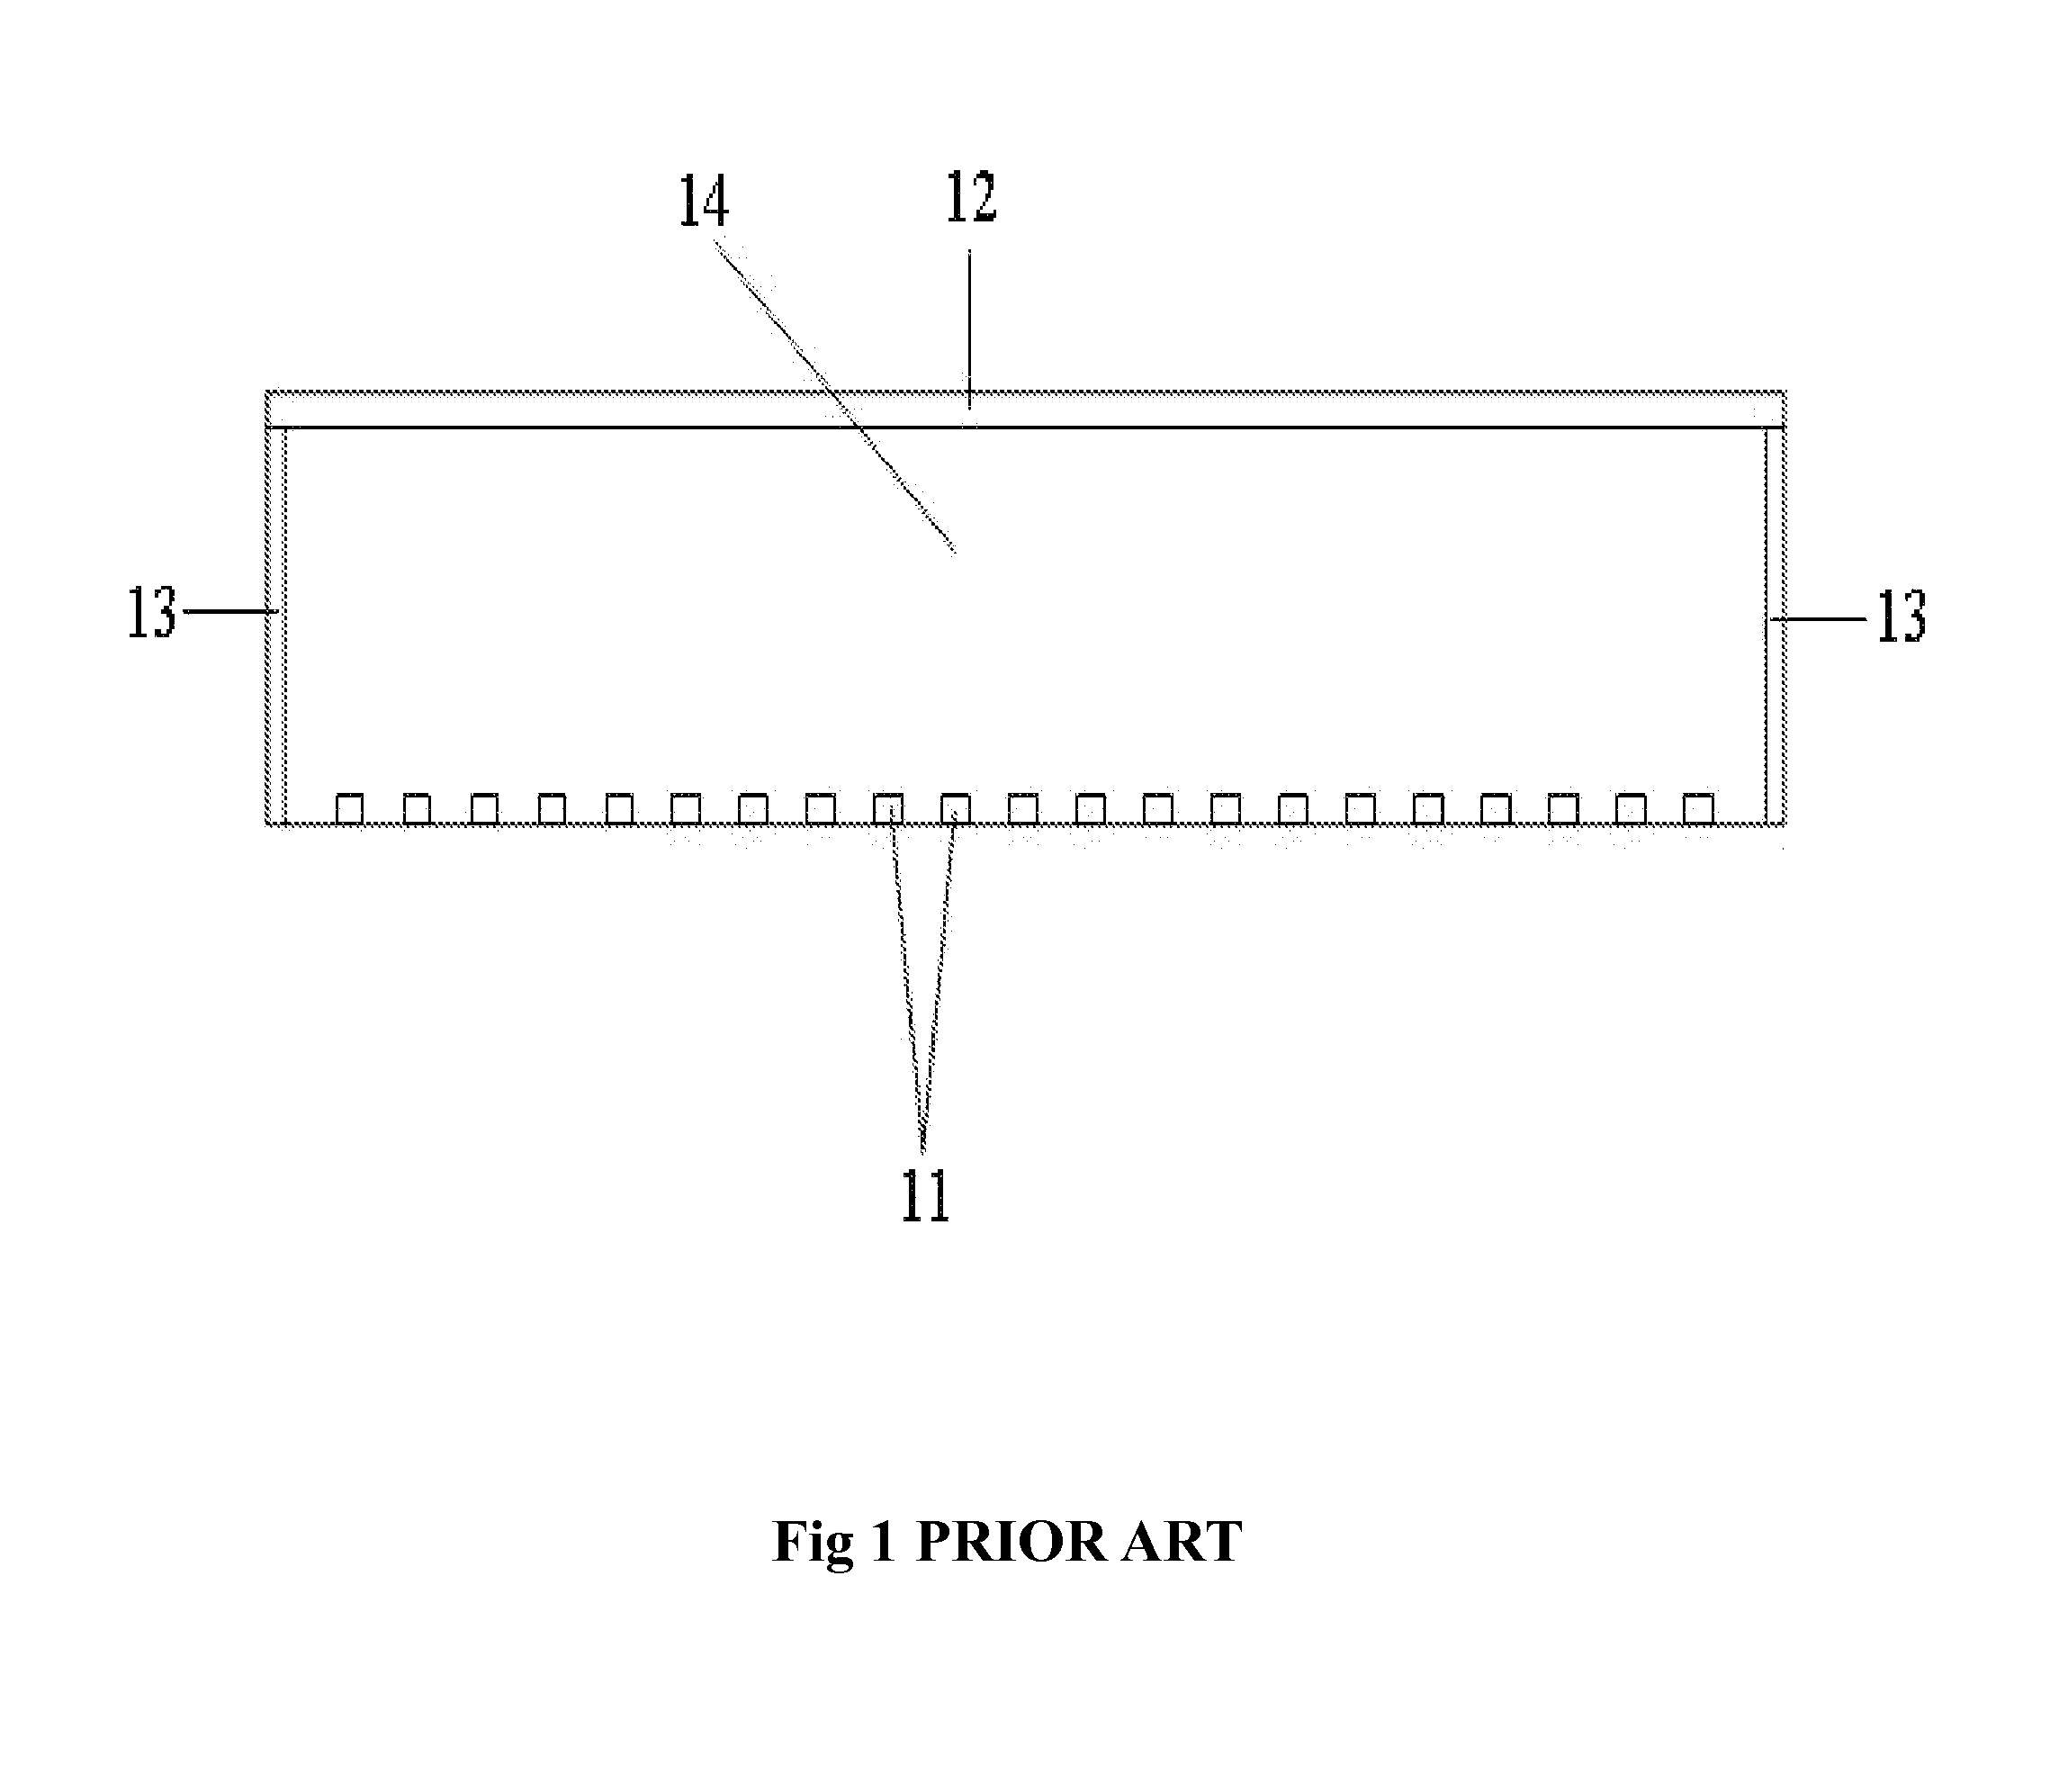 Direct-type backlight unit structure